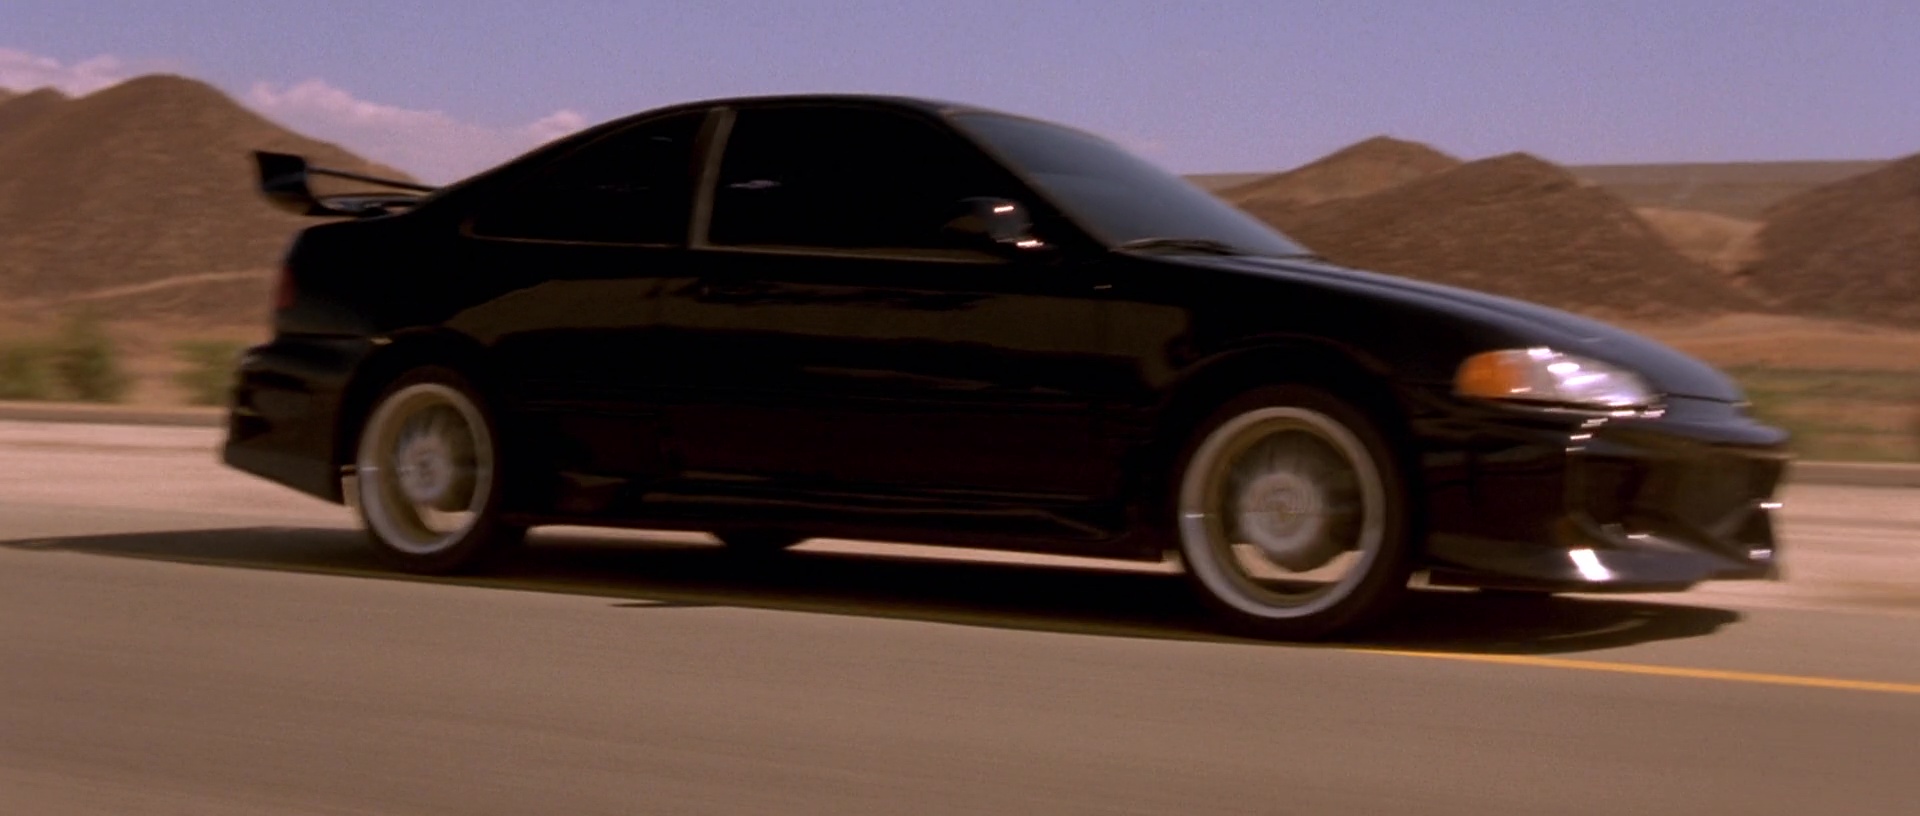 1993 Honda Civic EJ1 from The Fast and the Furious.